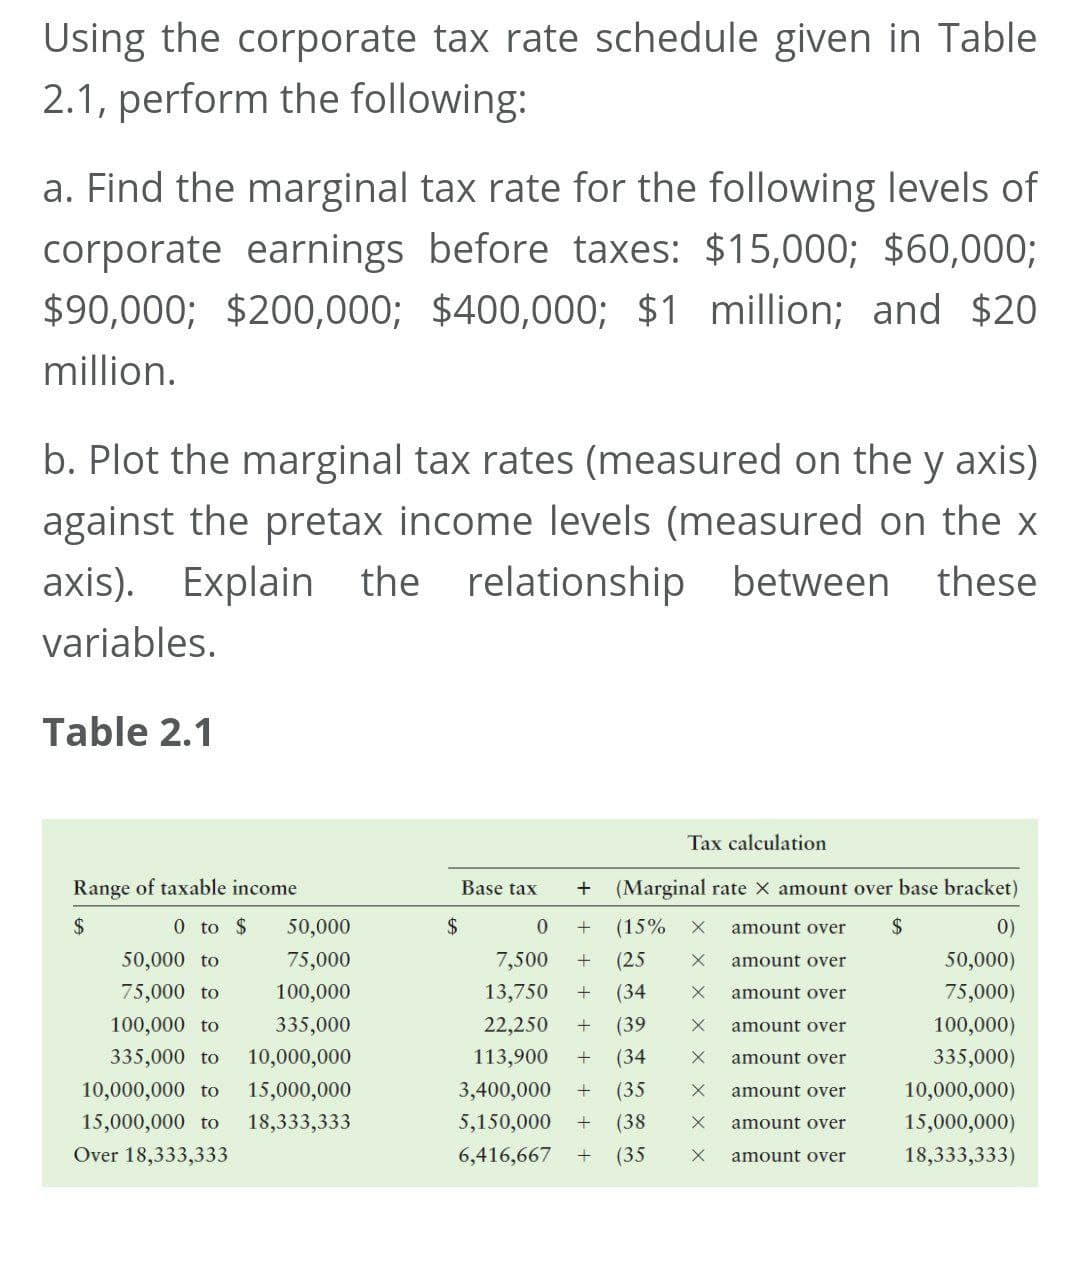 Using the corporate tax rate schedule given in Table
2.1, perform the following:
a. Find the marginal tax rate for the following levels of
corporate earnings before taxes: $15,000; $60,000;
$90,000; $200,000; $400,000; $1 million; and $20
million.
b. Plot the marginal tax rates (measured on the y axis)
against the pretax income levels (measured on the x
axis). Explain the relationship between these
variables.
Table 2.1
Tax calculation
Range of taxable income
Base tax
(Marginal rate X amount over base bracket)
2$
0 to $
50,000
+
(15%
amount over
2$
0)
50,000 to
75,000
7,500
(25
amount over
50,000)
75,000 to
100,000
13,750
(34
amount over
75,000)
100,000 to
335,000
22,250
(39
amount over
100,000)
335,000 to
10,000,000
113,900
(34
amount over
335,000)
10,000,000 to
15,000,000
3,400,000
(35
amount over
10,000,000)
15,000,000 to
18,333,333
5,150,000
(38
amount over
15,000,000)
Over 18,333,333
6,416,667
(35
amount over
18,333,333)
二8:
+ + + + + t +
